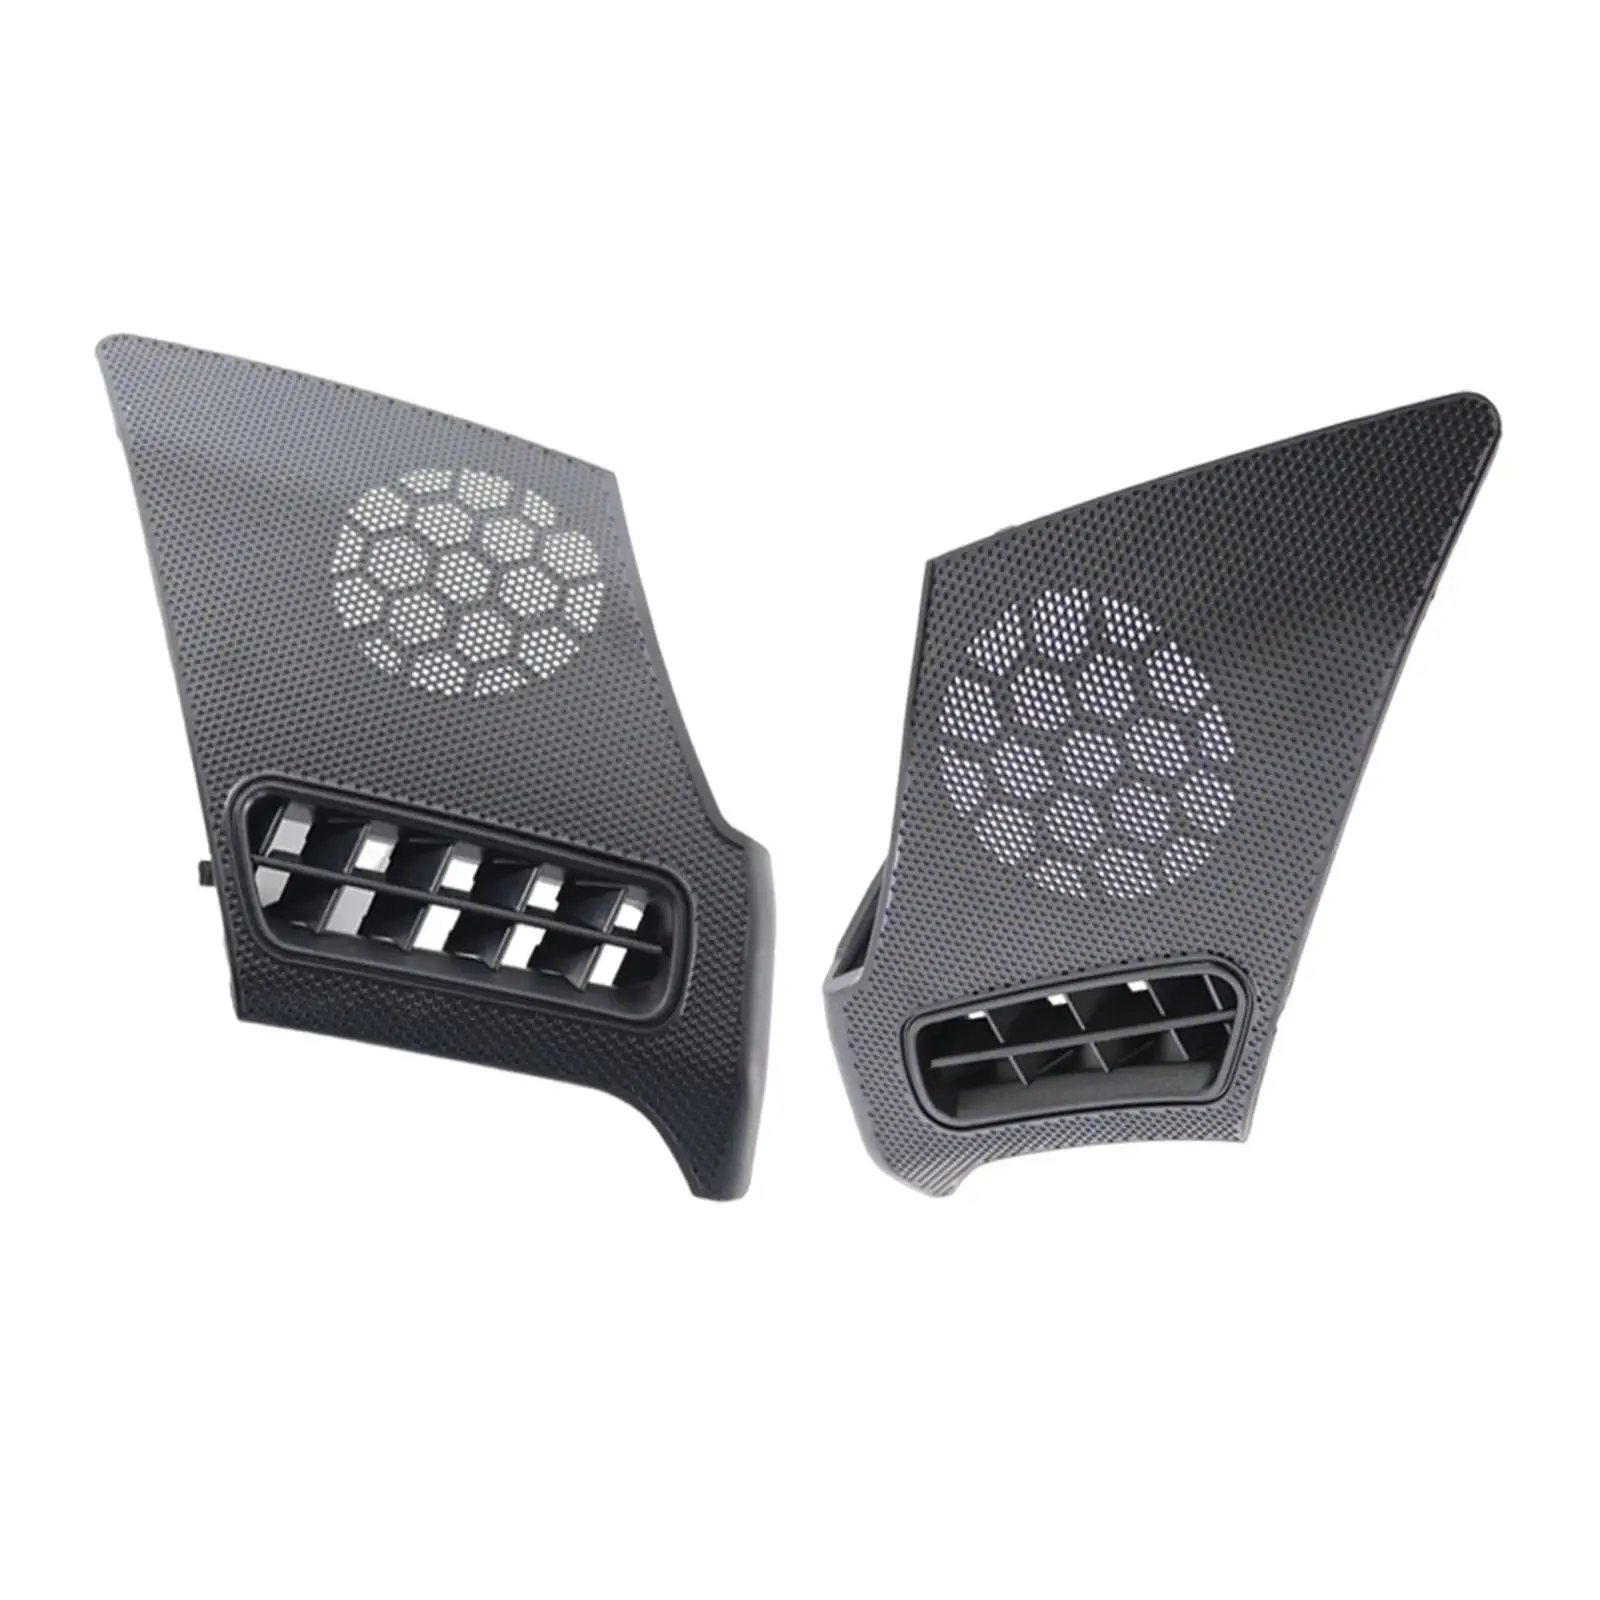  Board Air Vent  Grill Covers Decorative Protective Durable